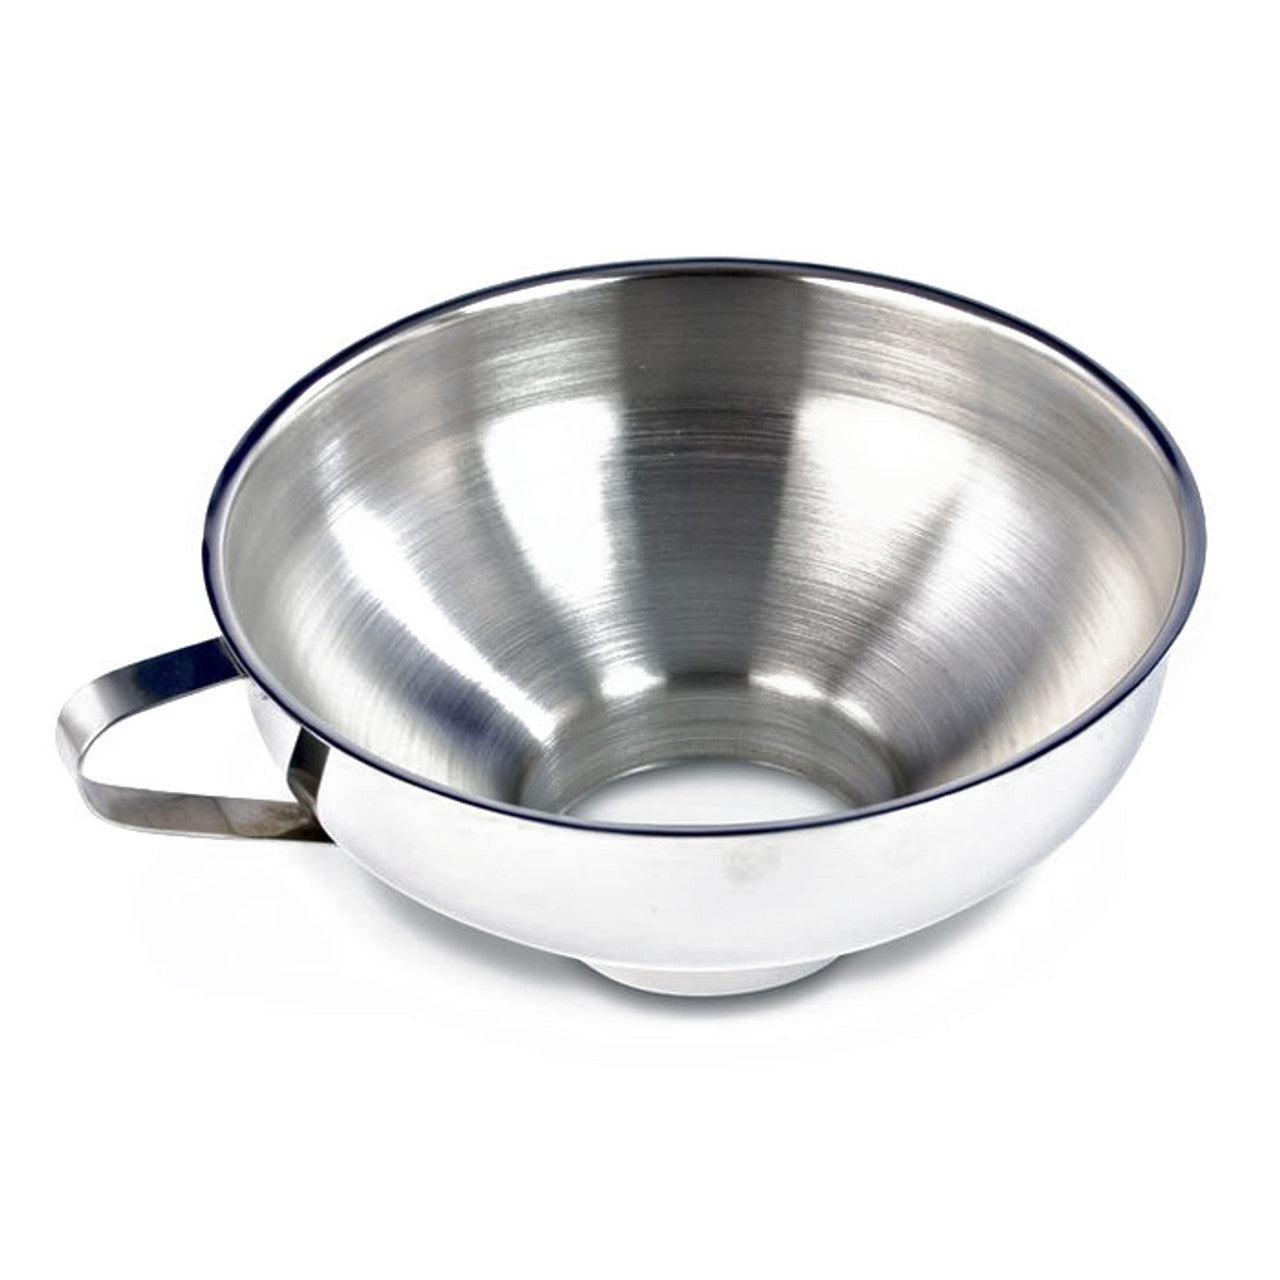 Professional Stainless Steel Canning Funnel